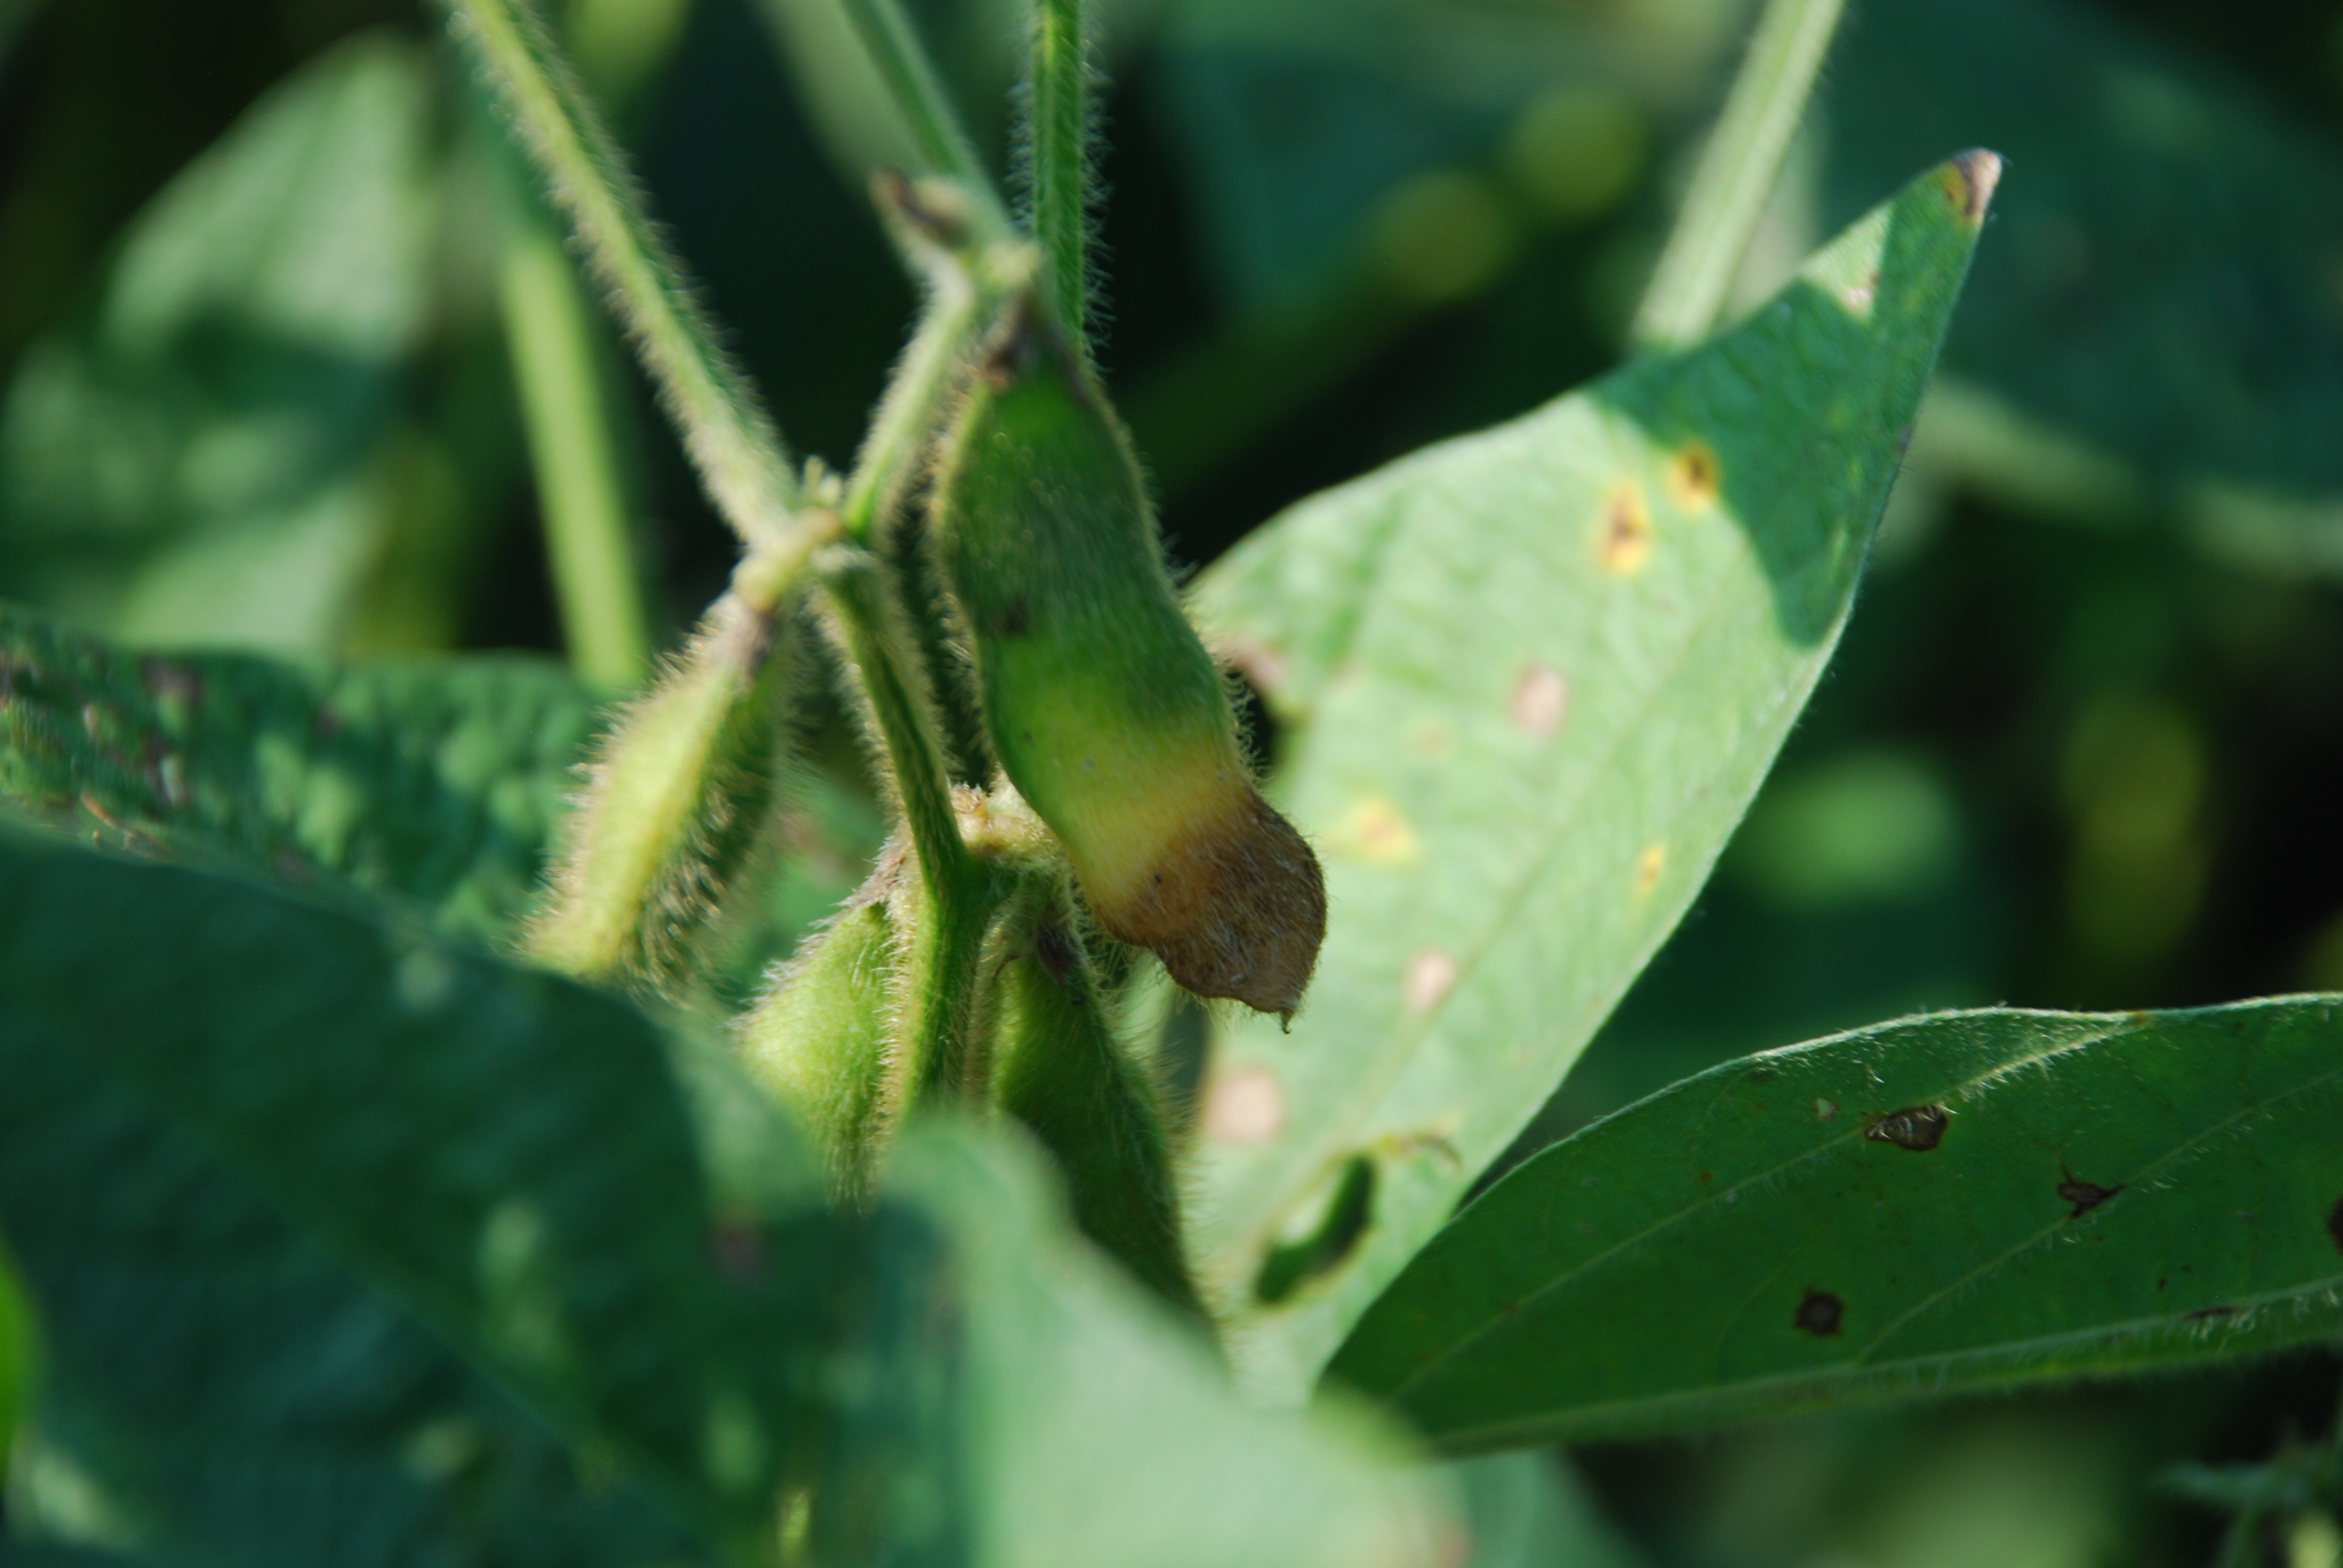 This agronomic image shows frogeye leaf spot pod damage on soybeans.